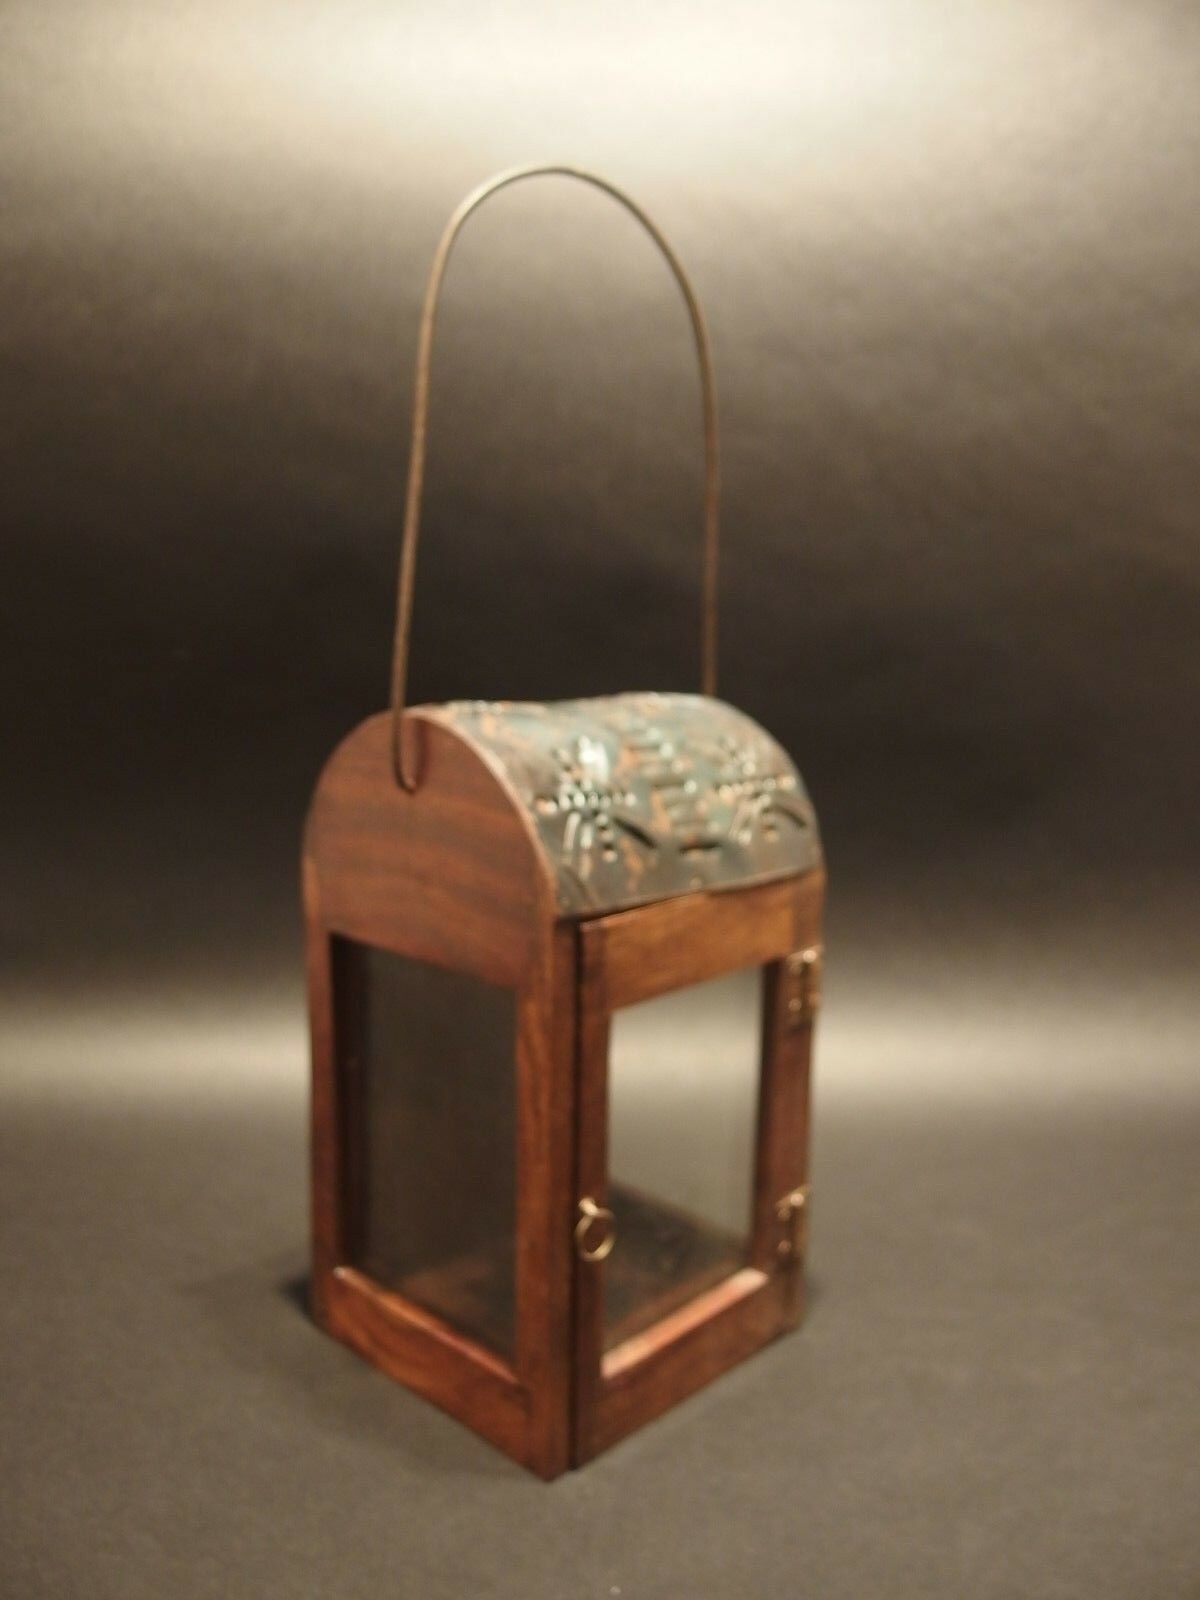 Antique Style Wood Punched Tin Glass Lantern Lamp Candle Holder - Early Home Decor